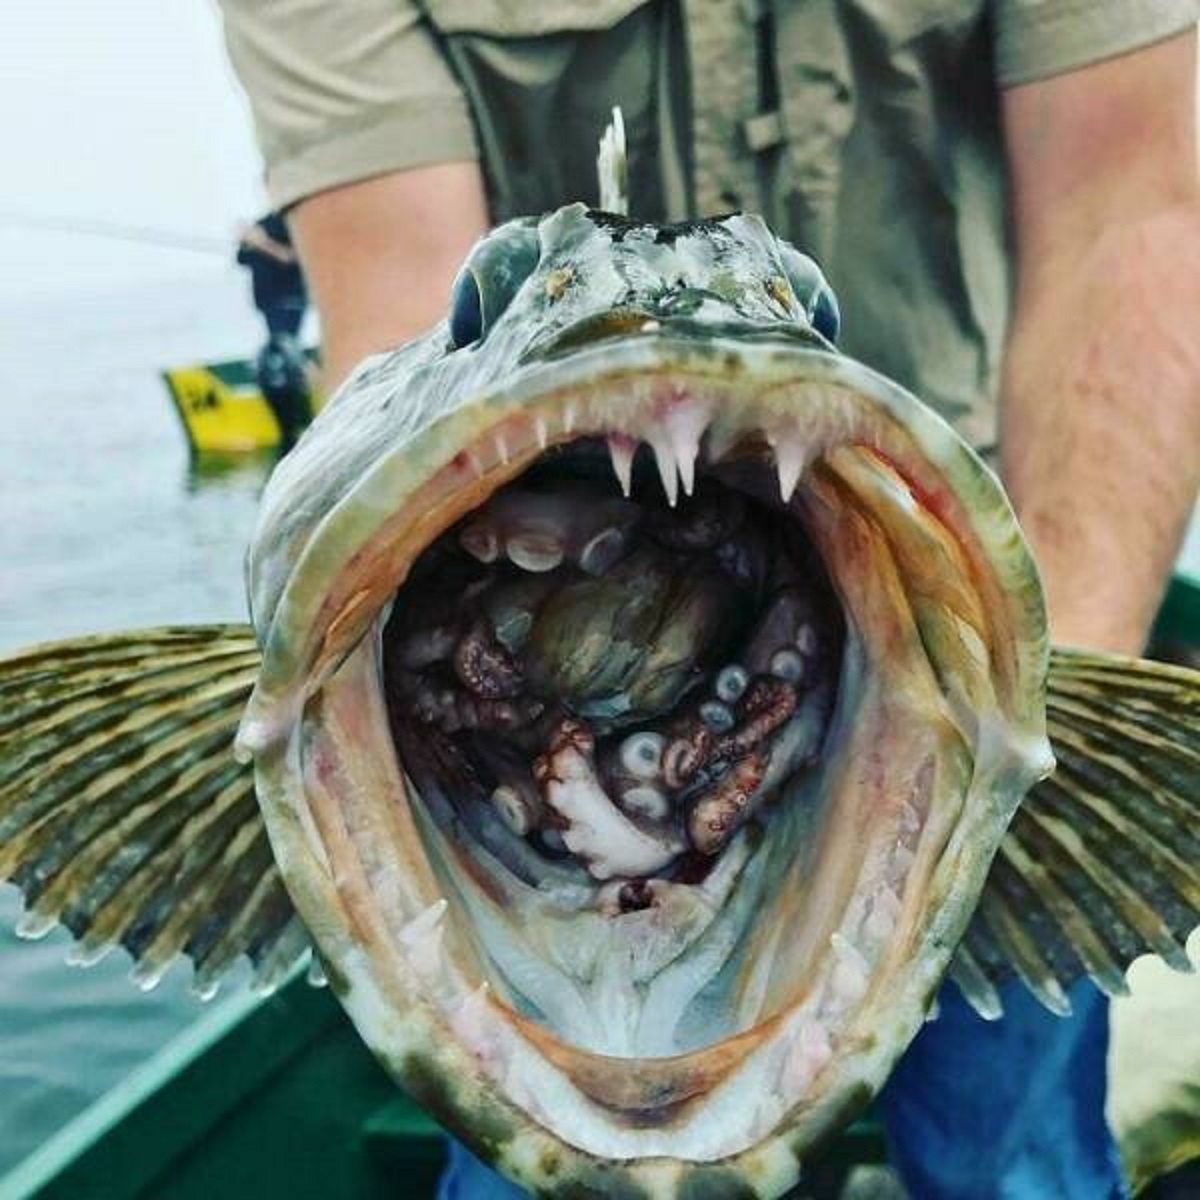 "Someone In Oregon Caught This Ling Cod, Complete With A 'Belly Full' Of Octopus"